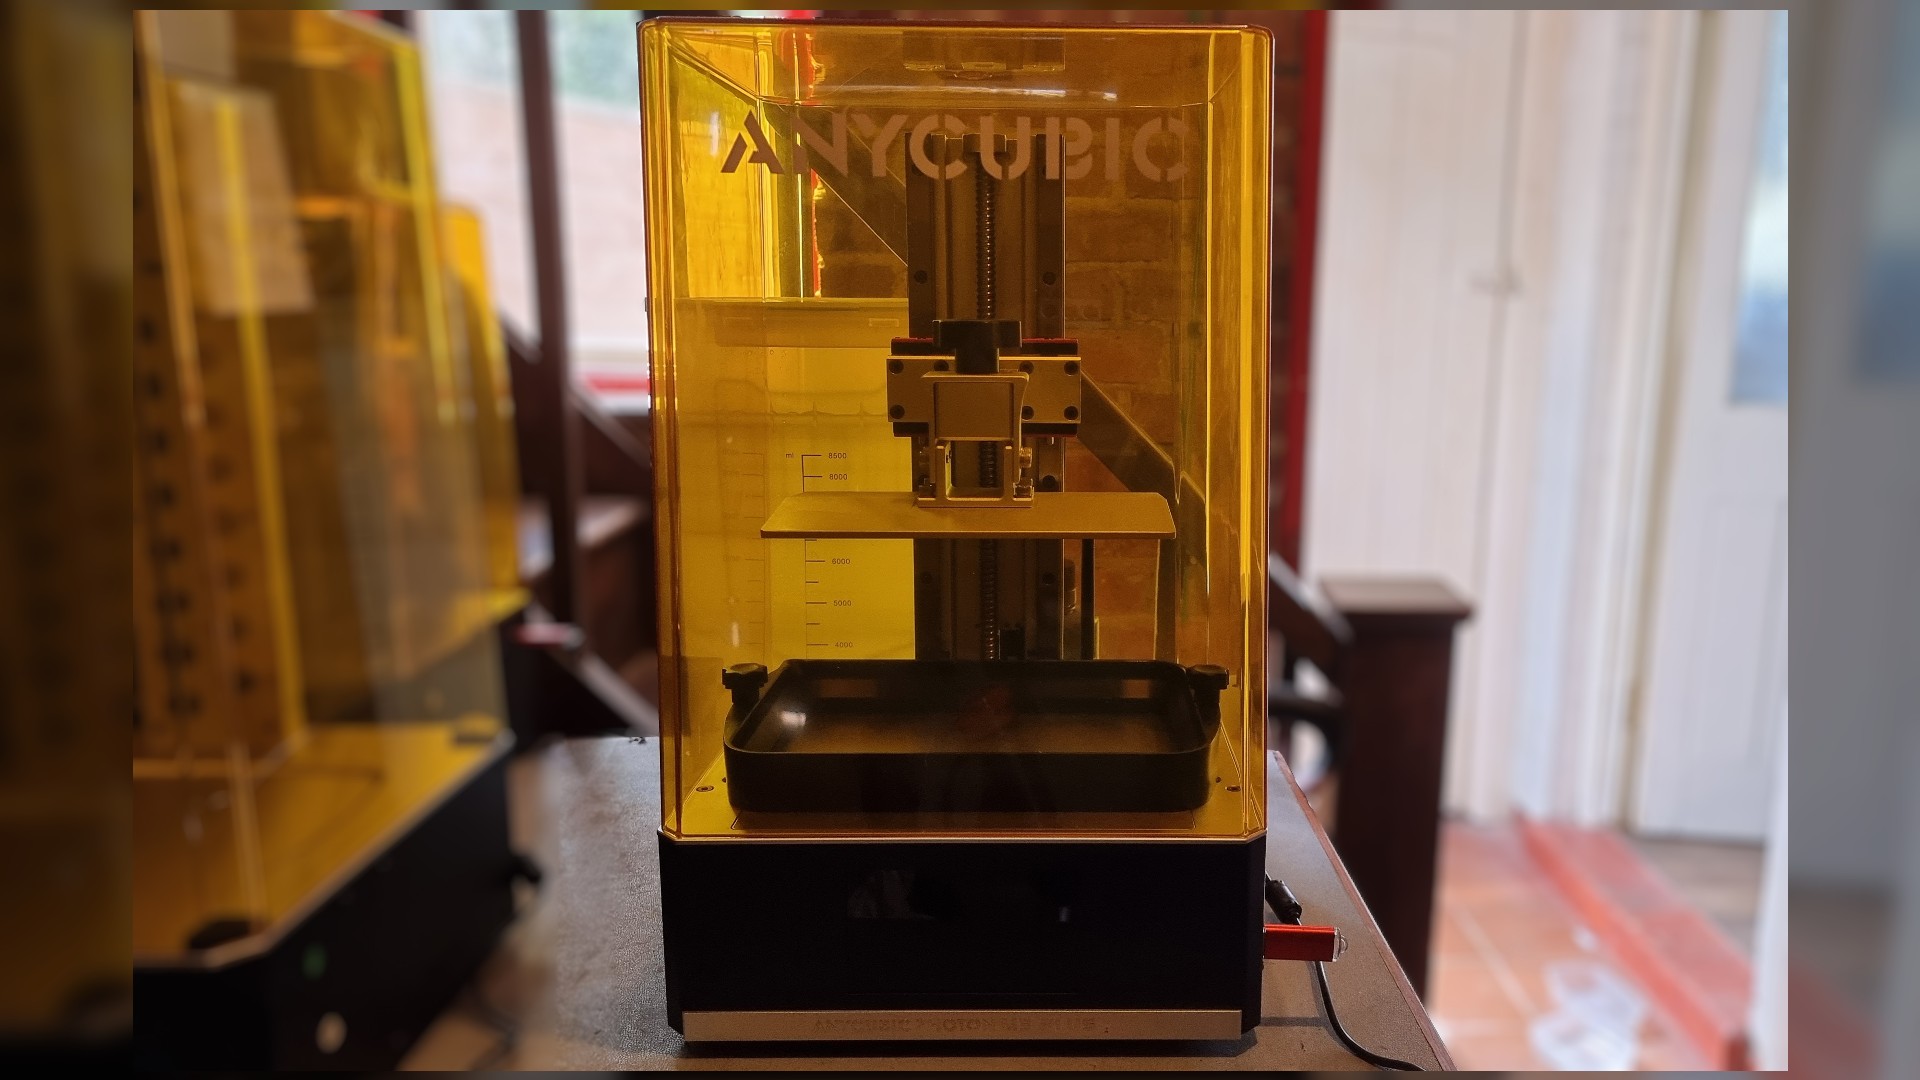 Scale your LCD 3D printing with the Anycubic Photon M3 Plus